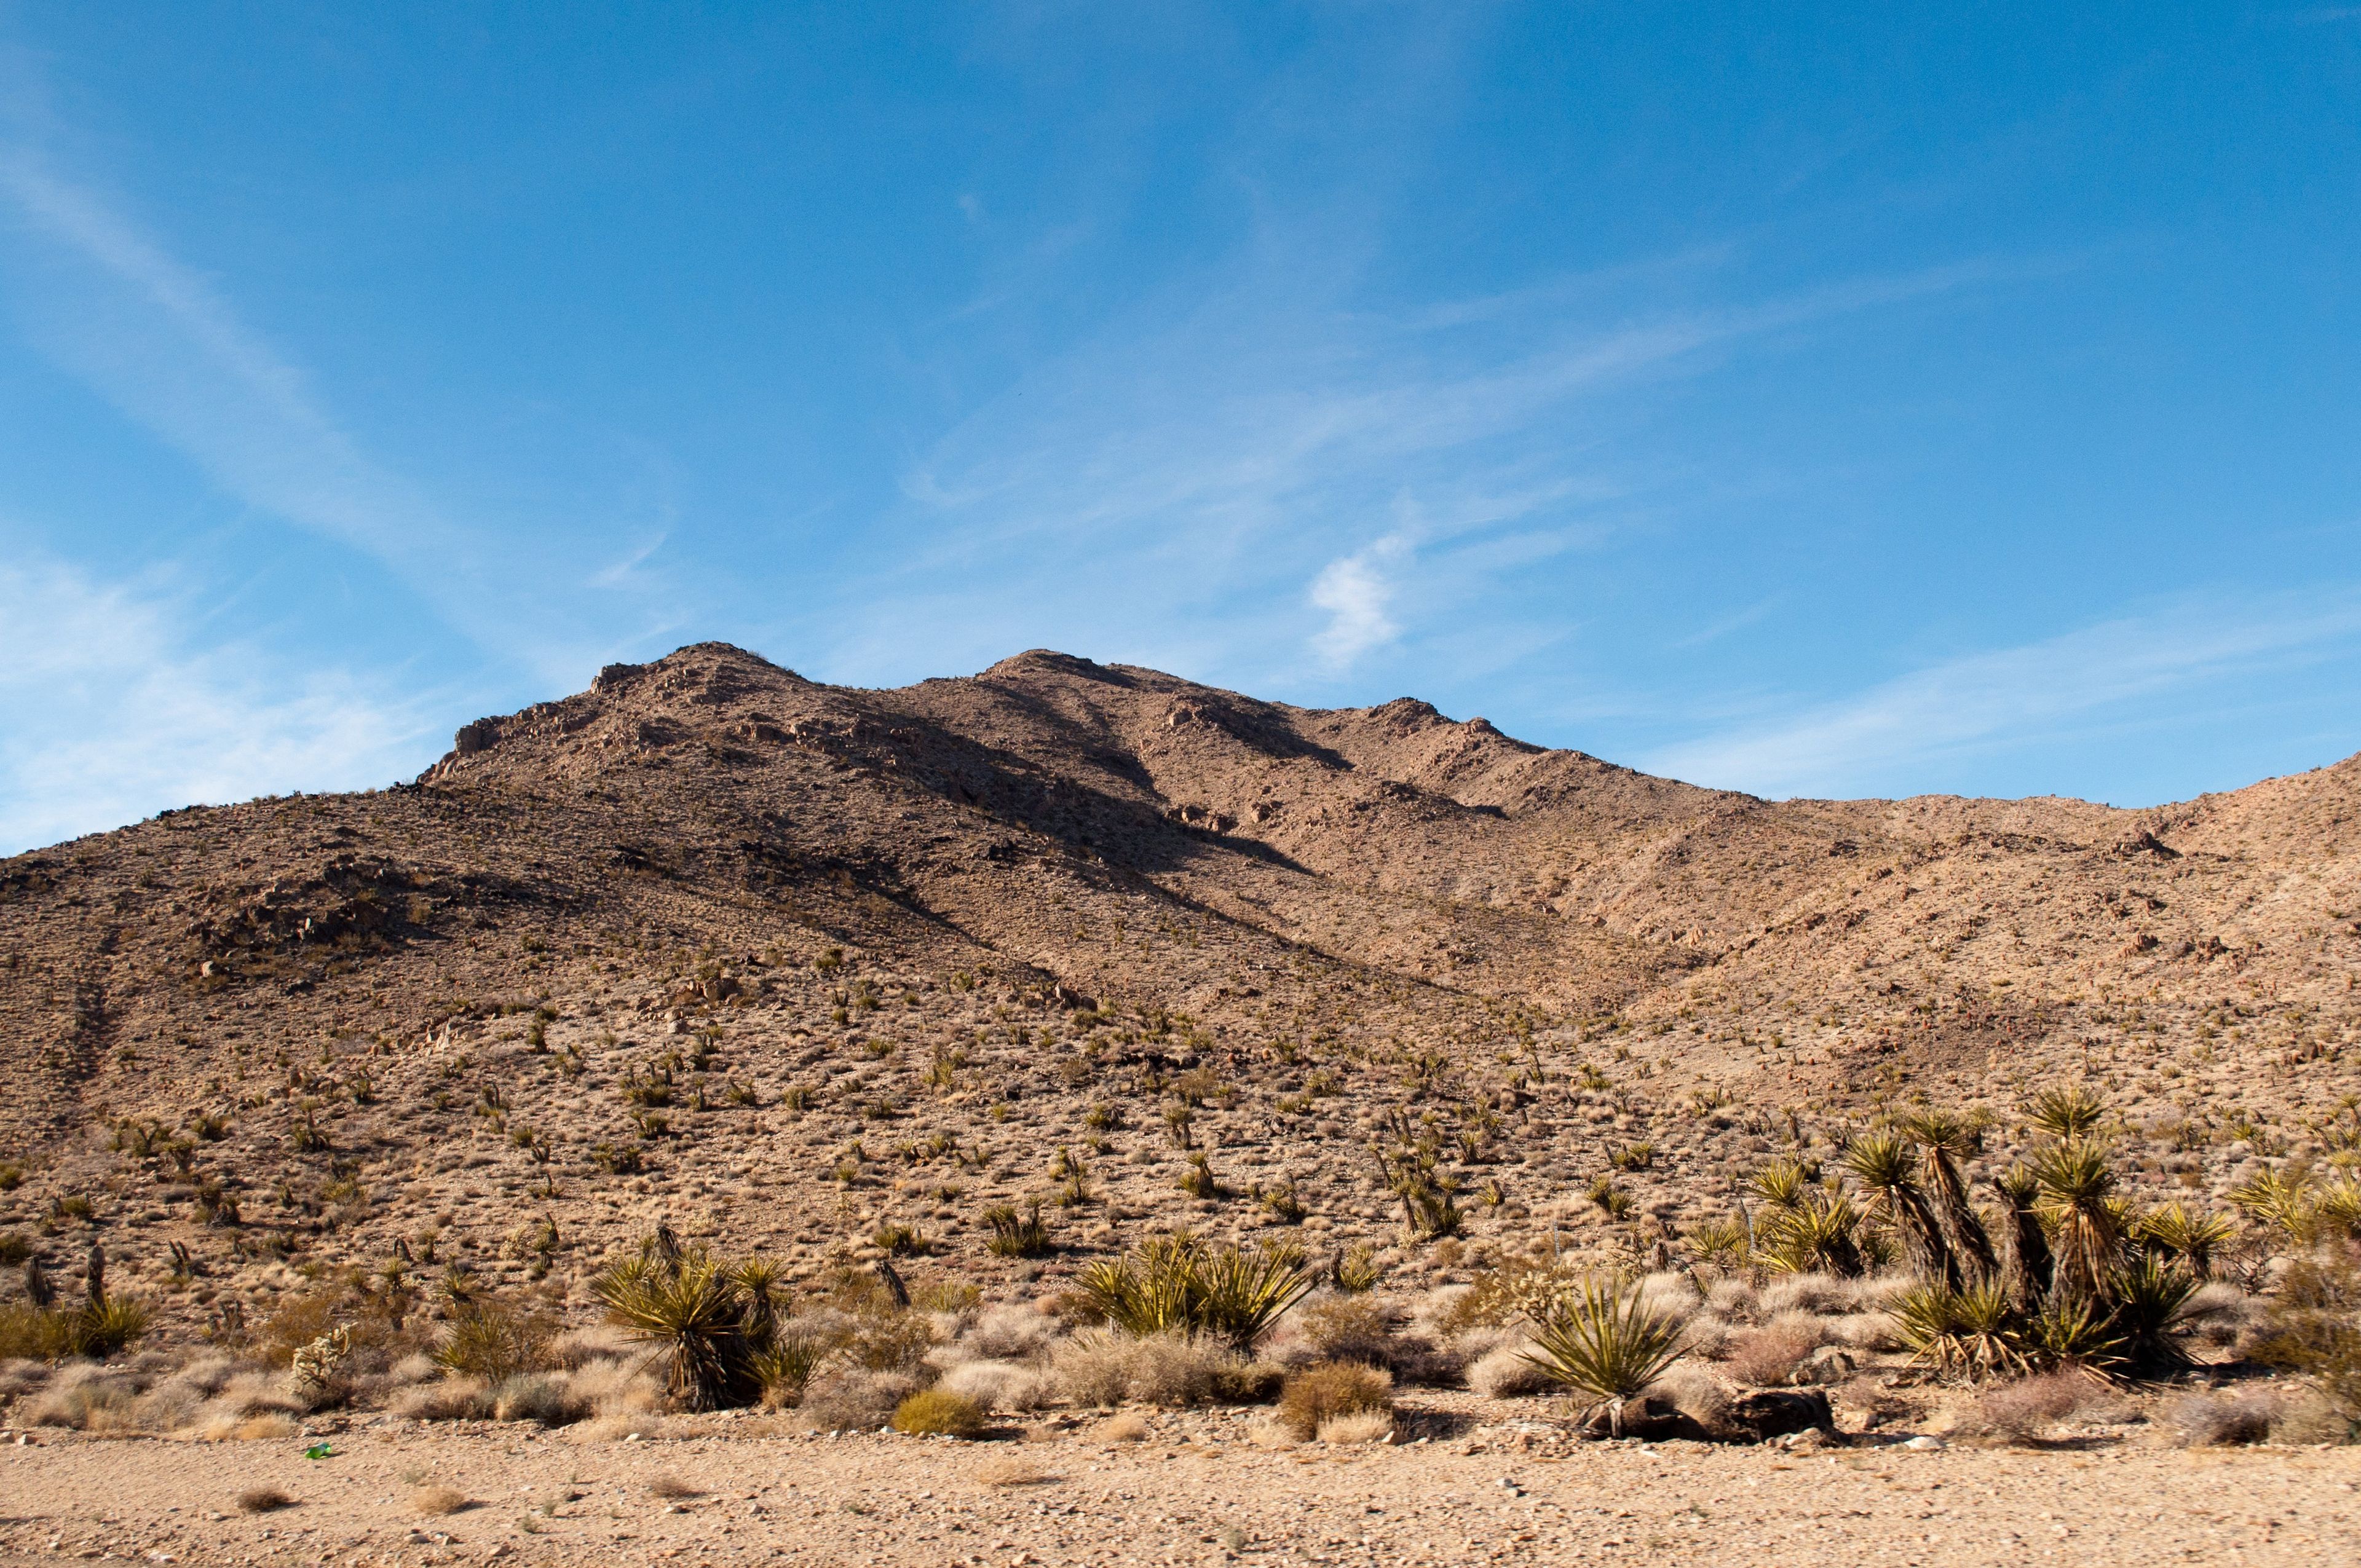 A desert landscape with several cacti and mountains in the background.